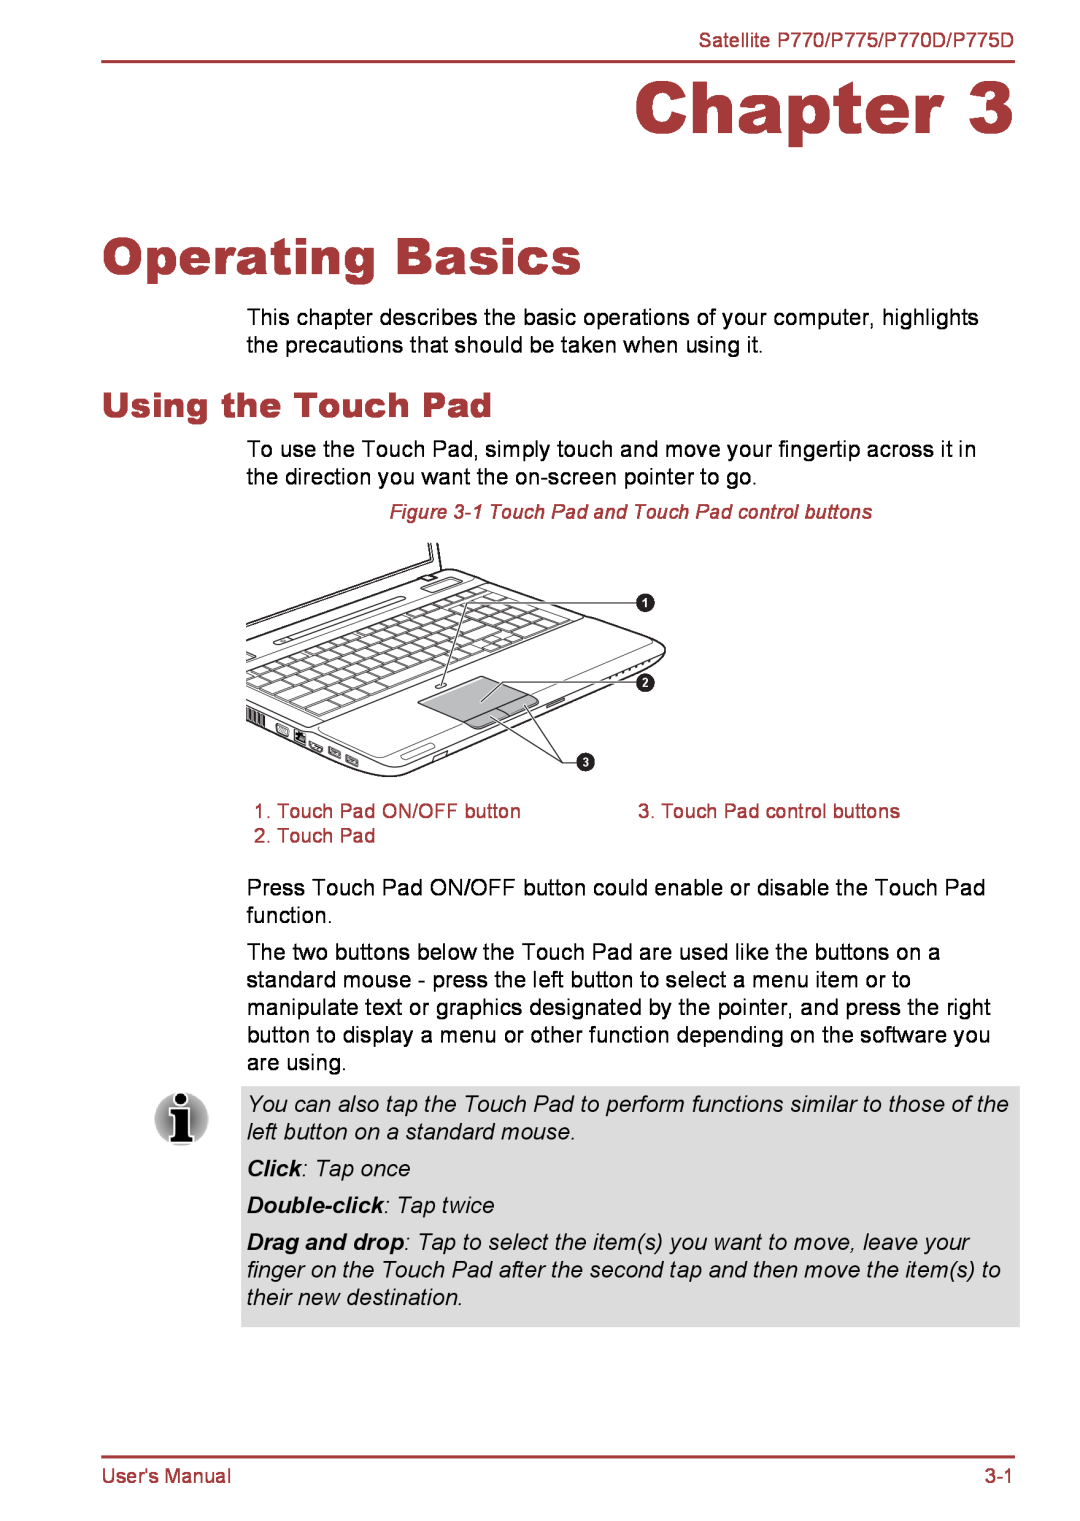 Toshiba P770 user manual Operating Basics, Using the Touch Pad, Double-click Tap twice, Chapter 